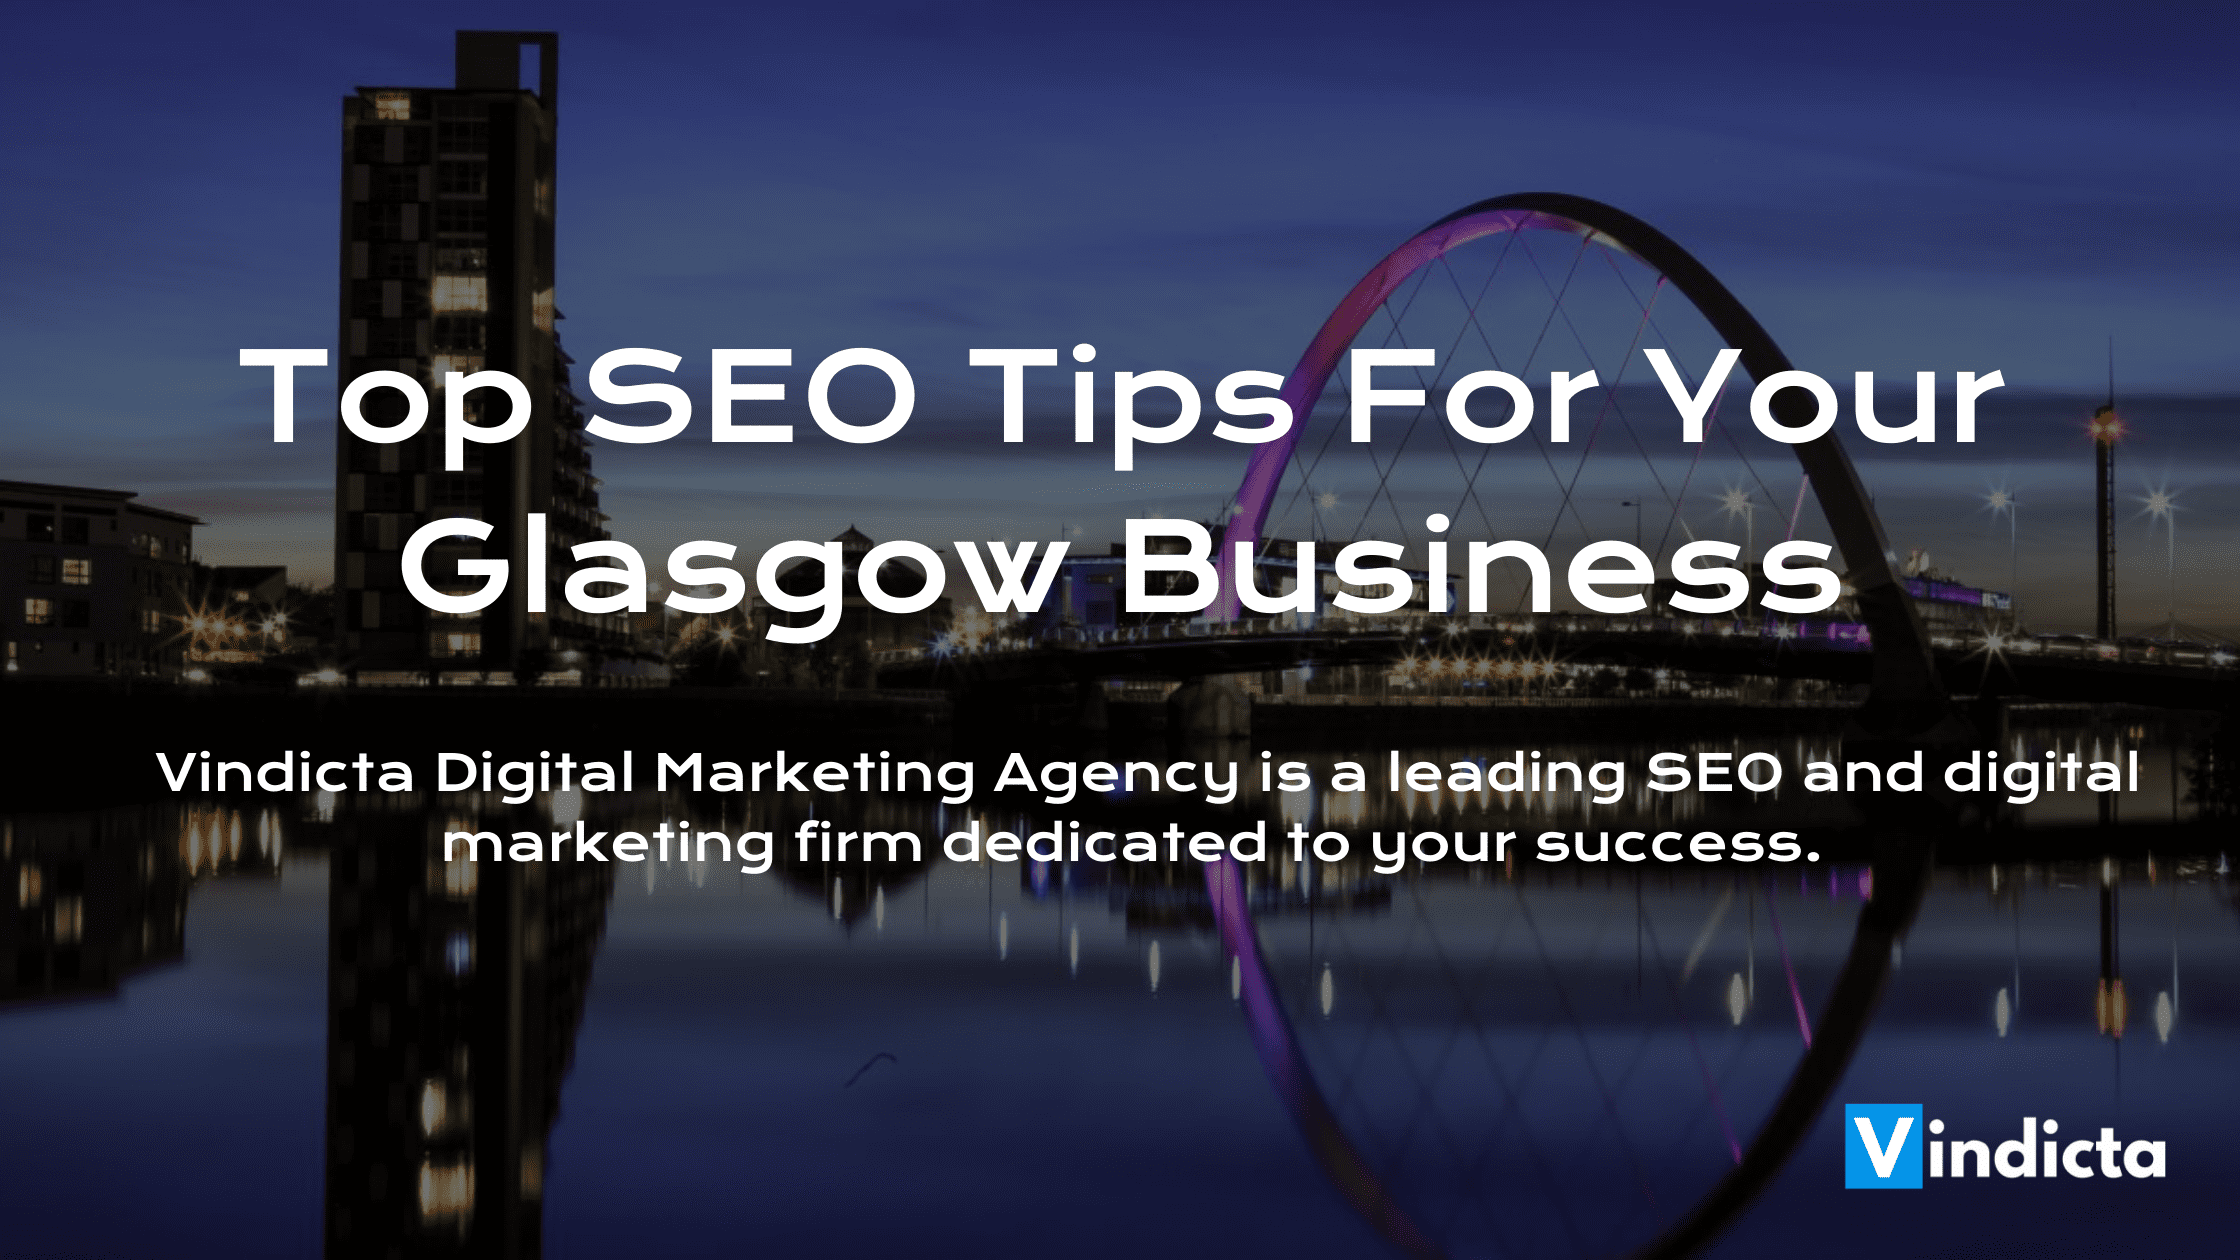 Top-SEO-Tips-For-Your-Glasgow-Business